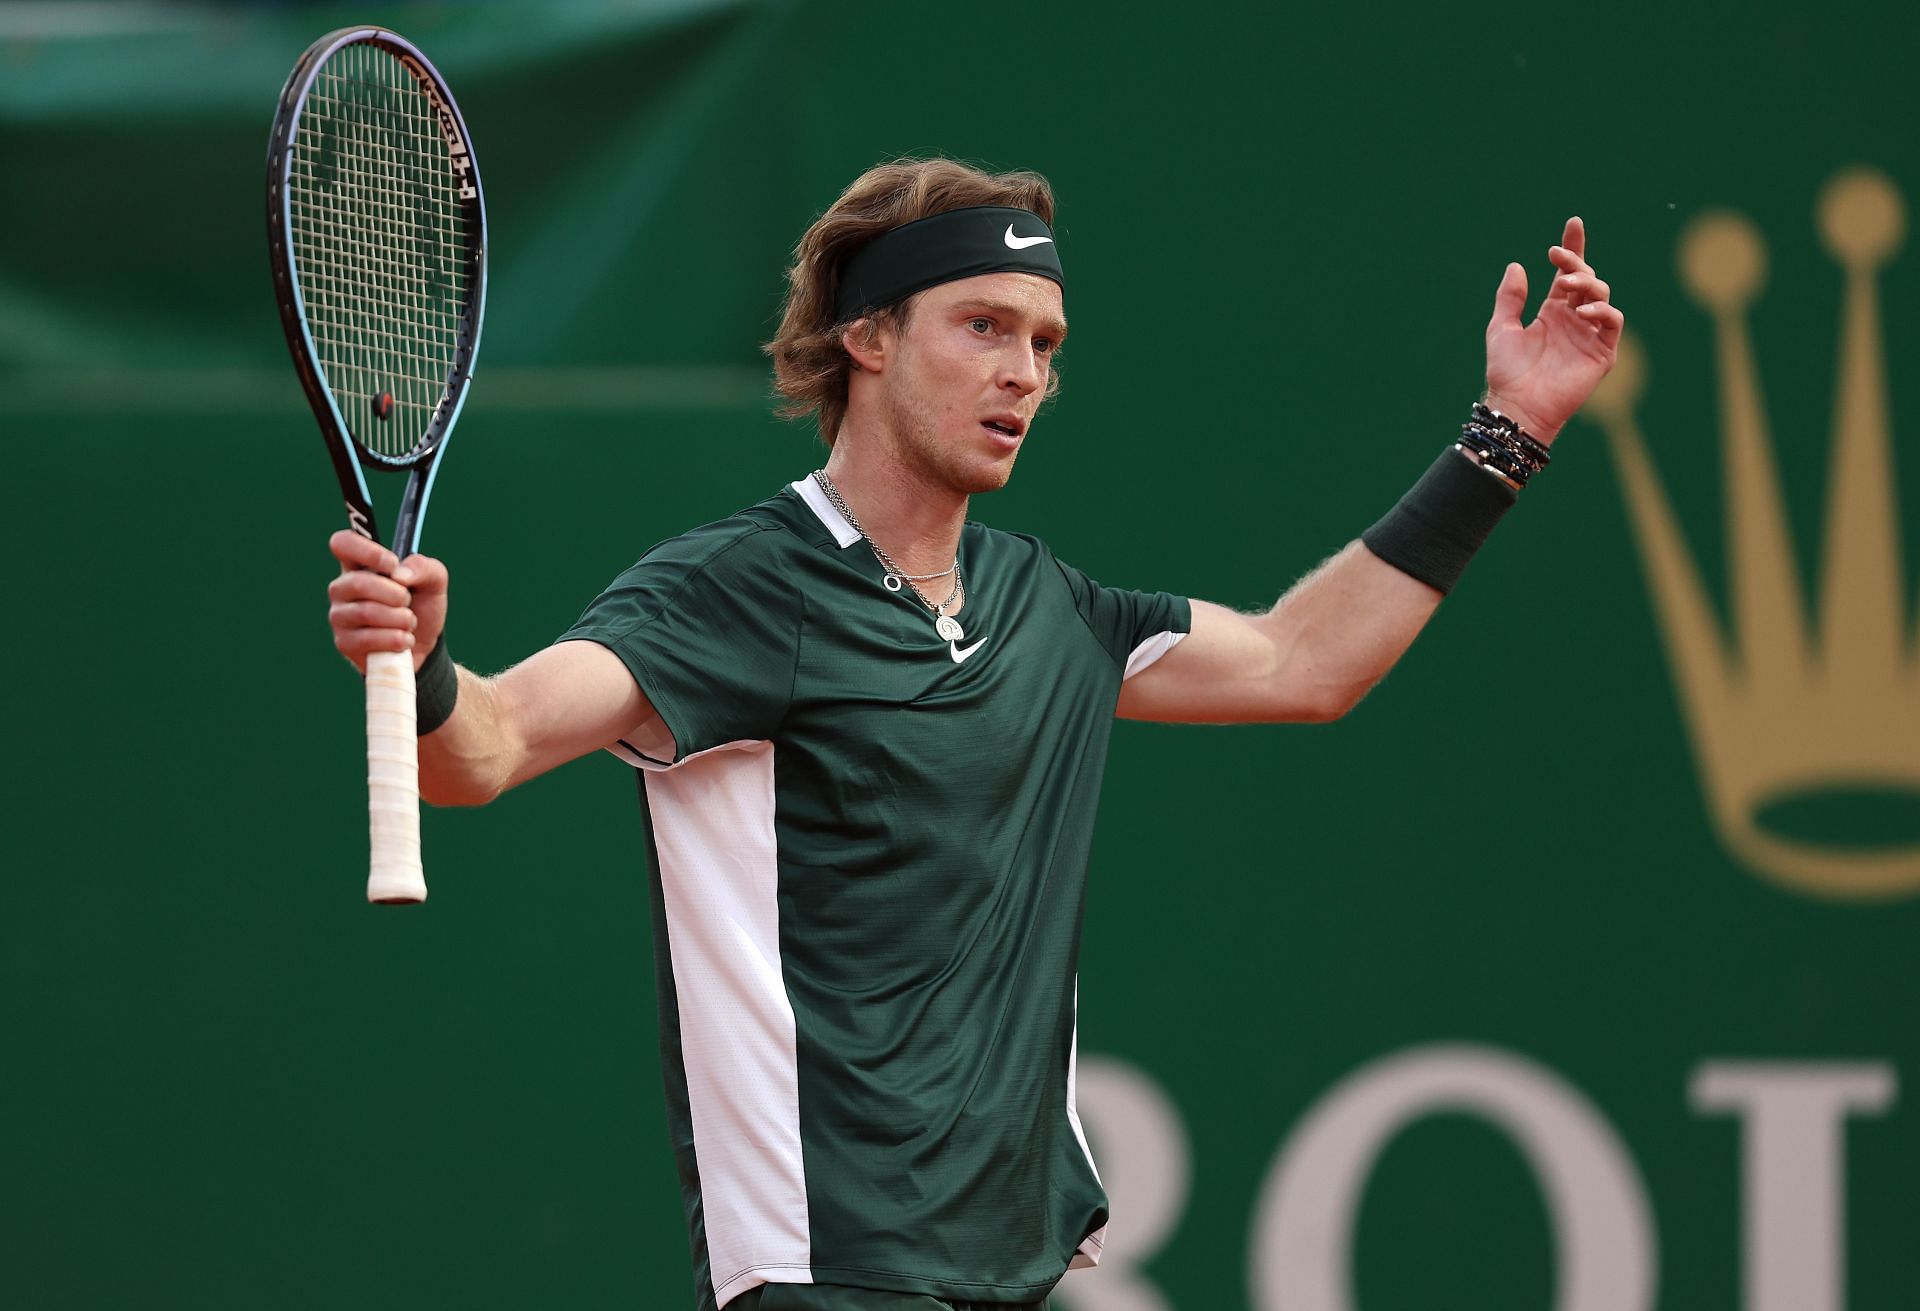 Andrey Rublev gestures during a match at the Rolex Monte-Carlo Masters